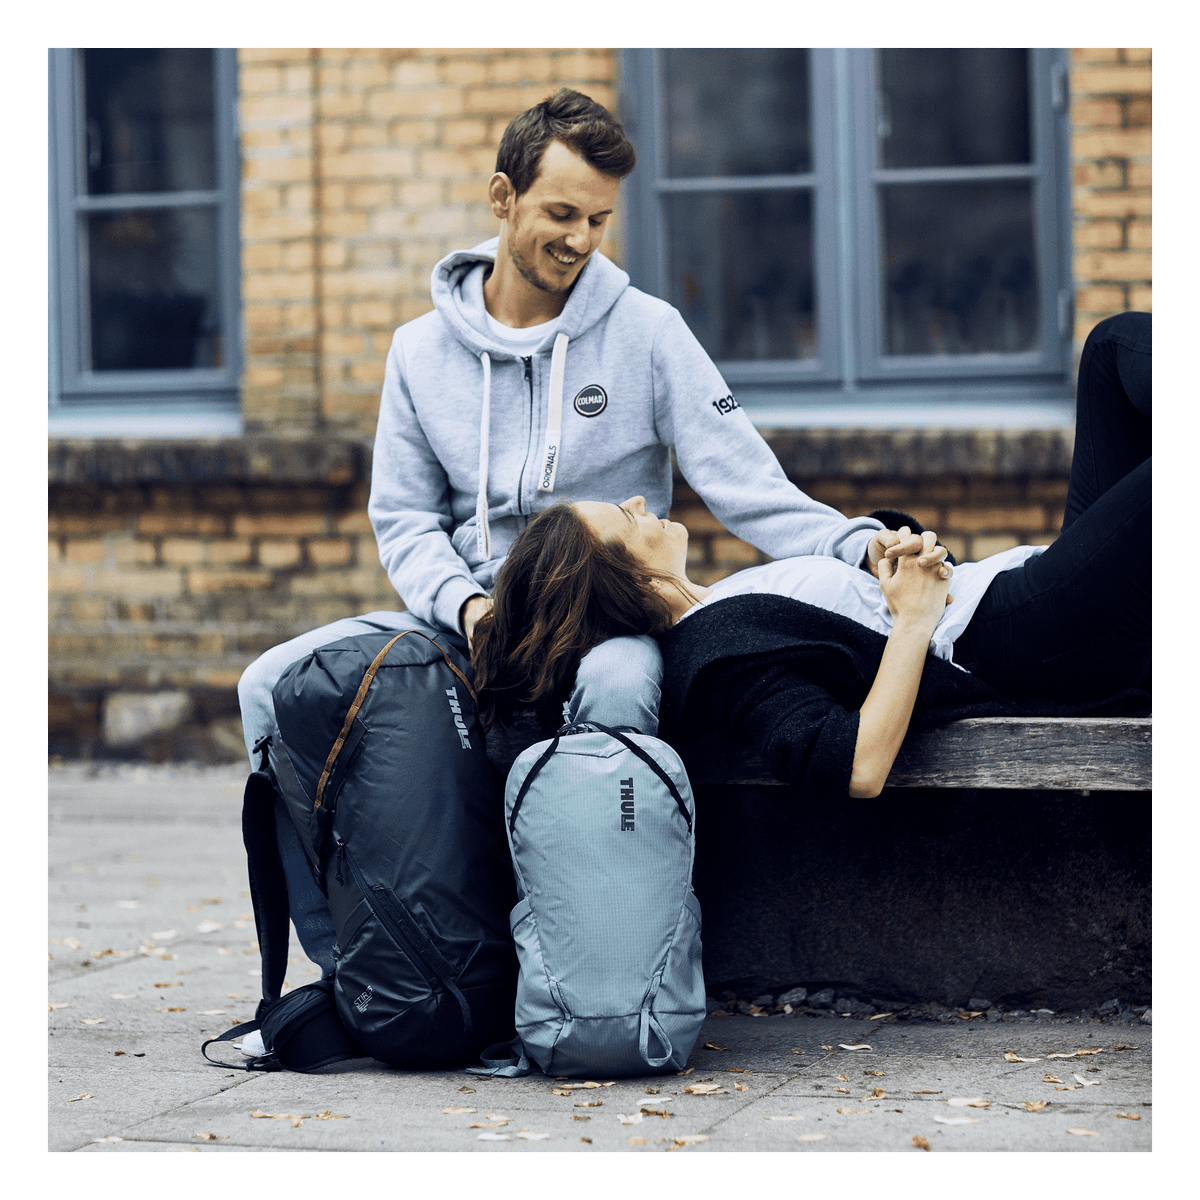 On a bench, a woman rests her head on the lap of a man who is holding a black and blue Thule Stir 35L backpack.